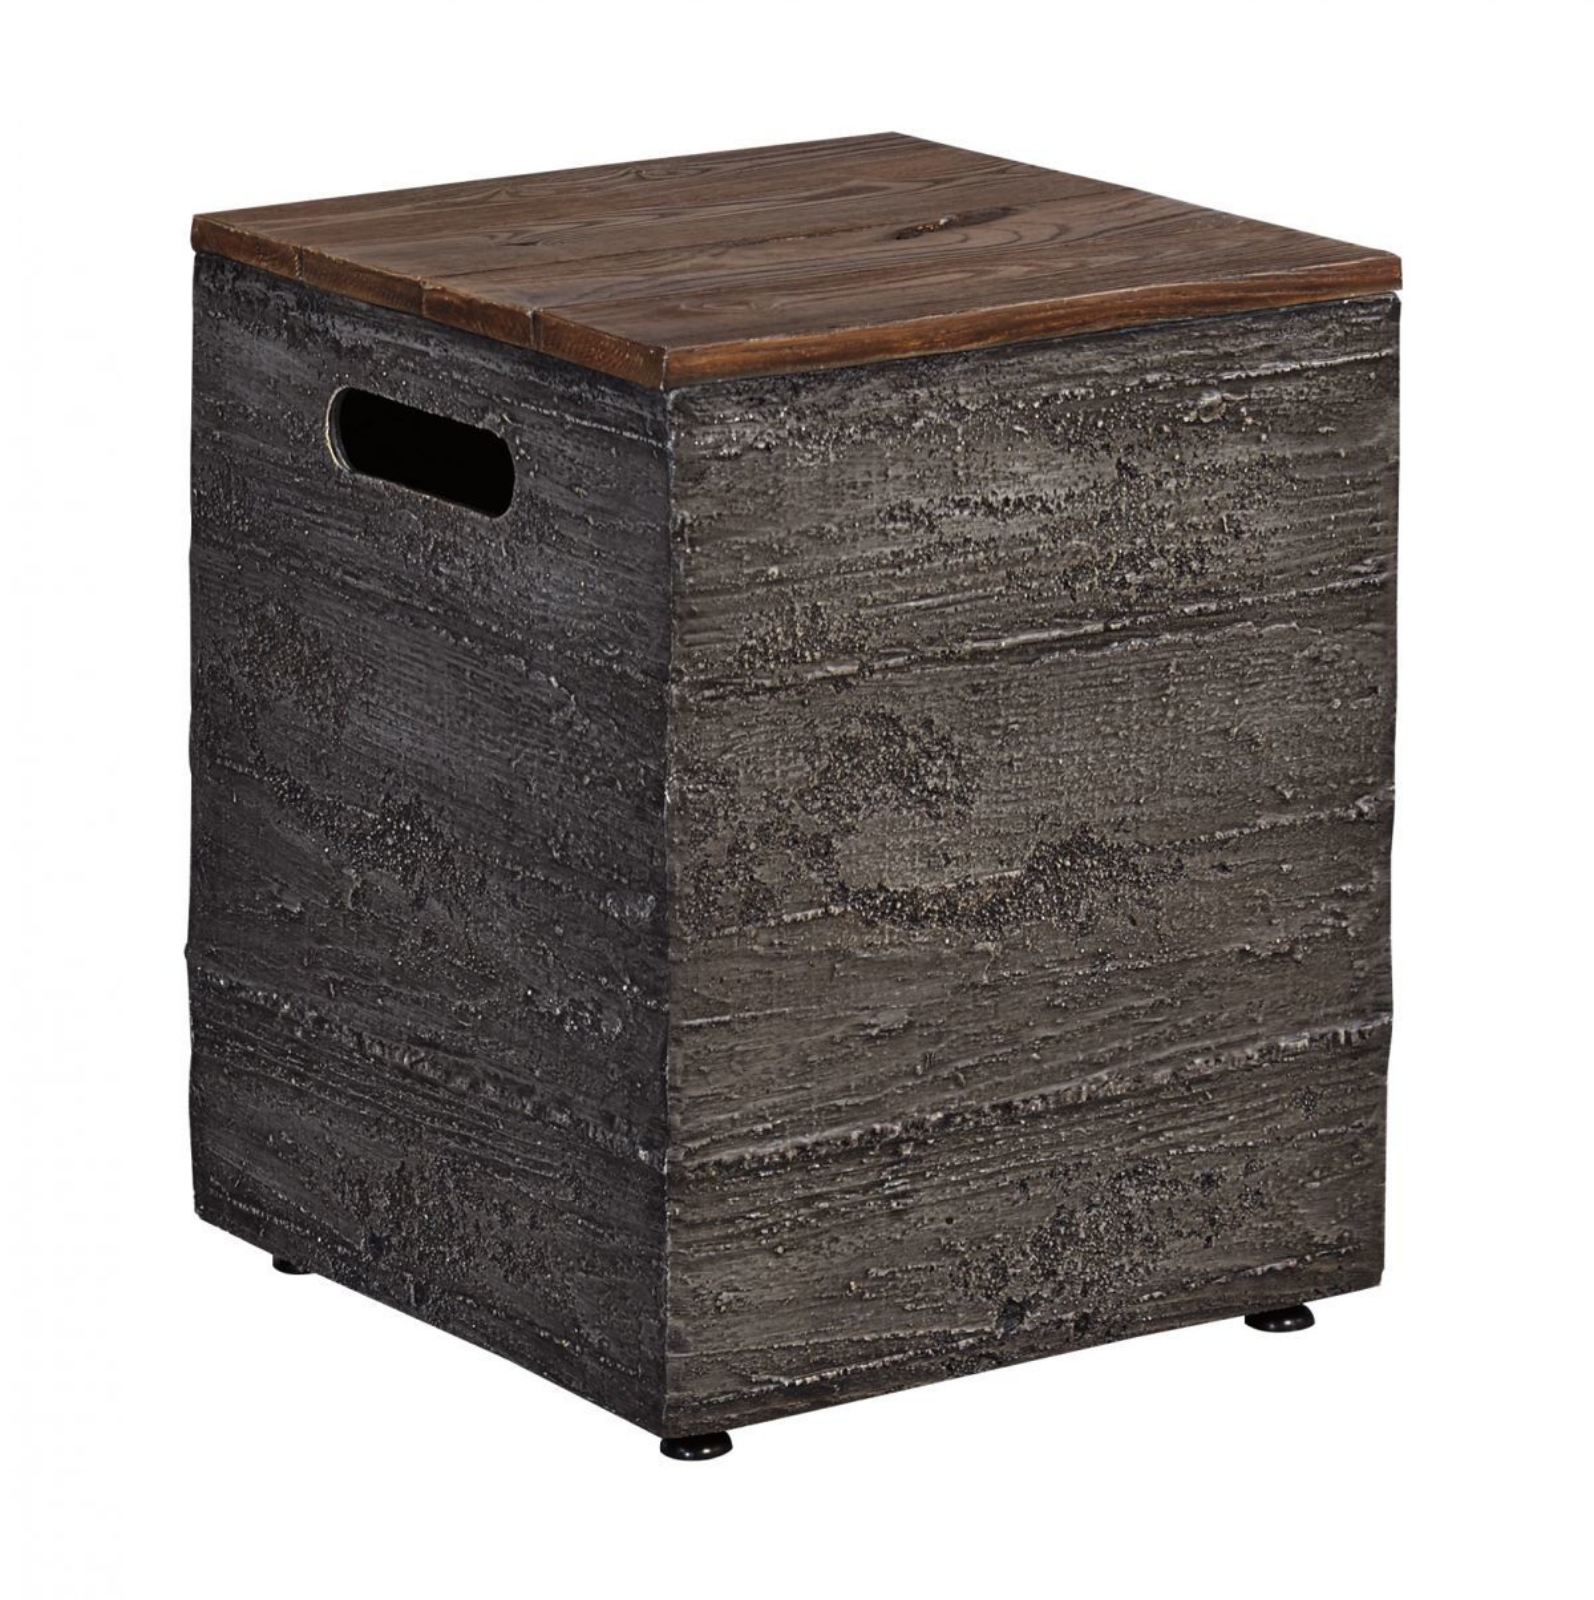 Picture of Hatchlands Patio Storage Box